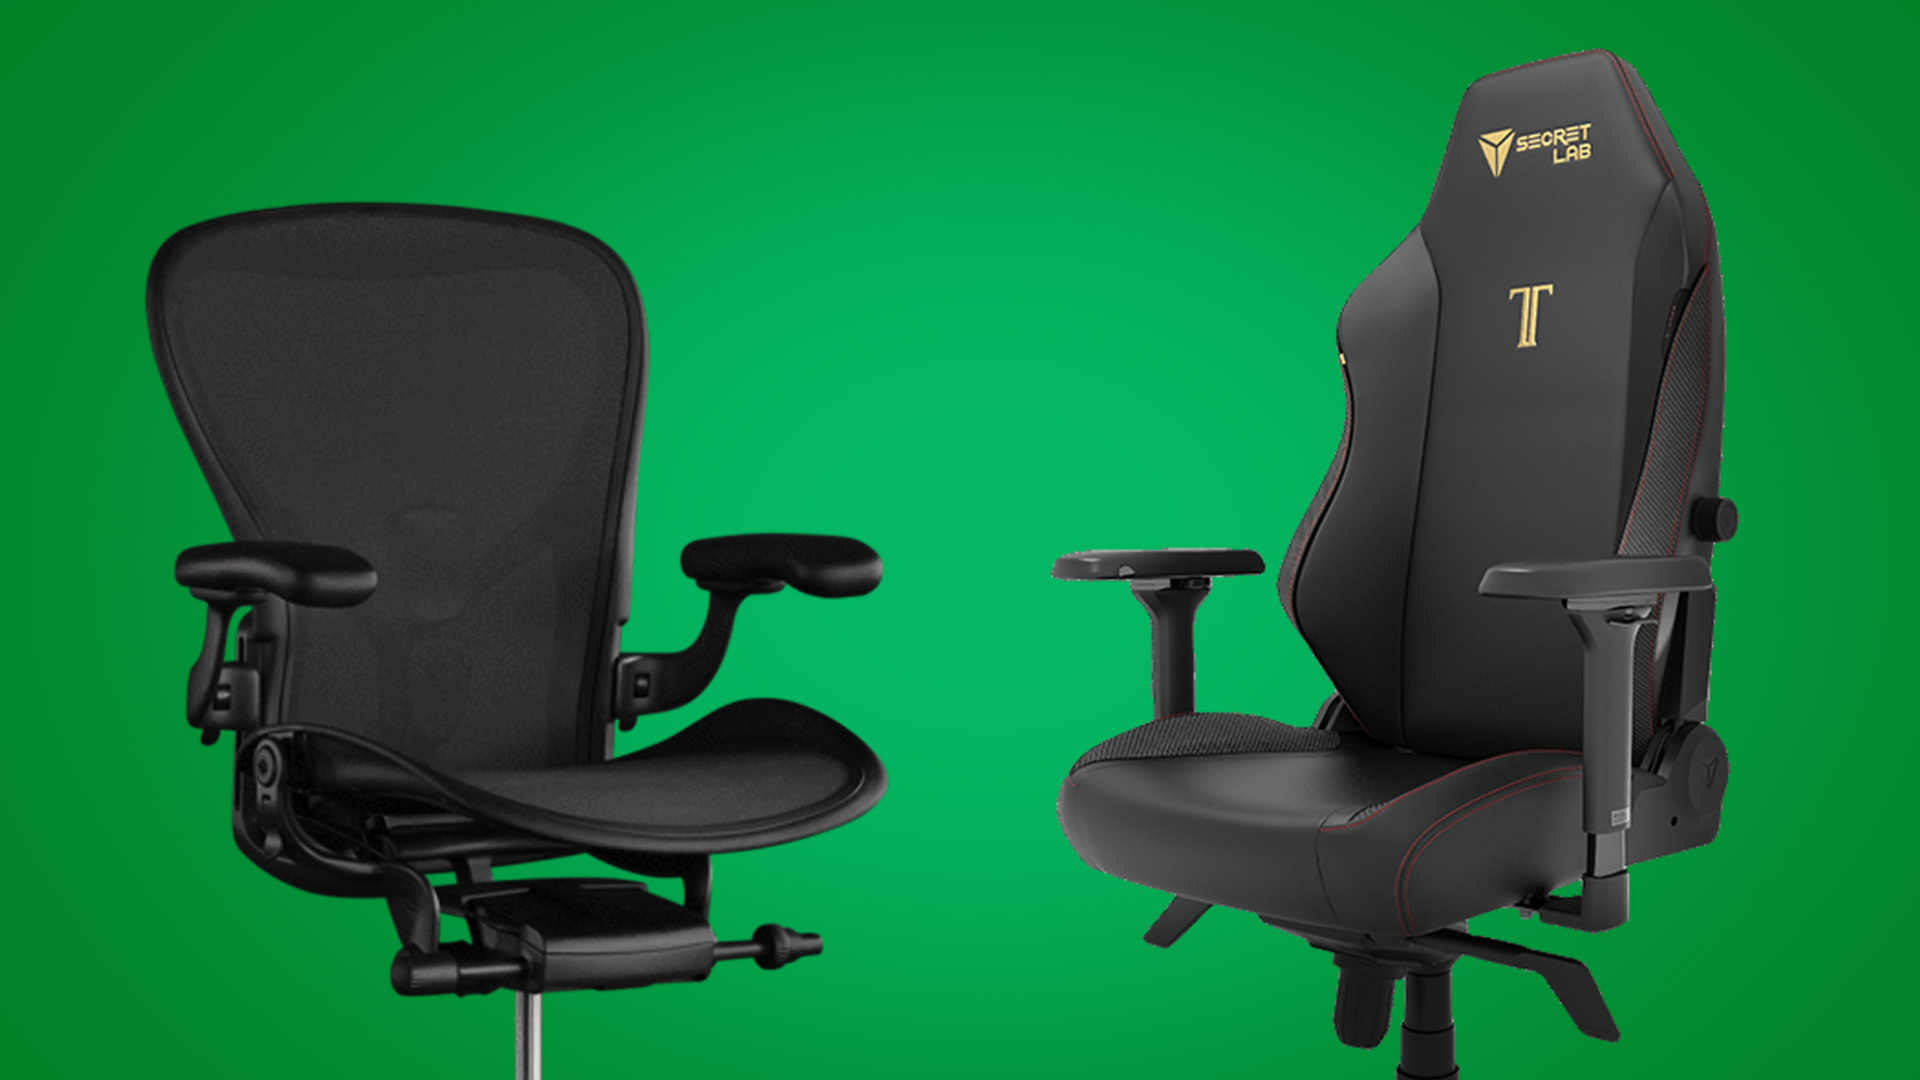 Properties of a Gaming Chair and an Office Chair